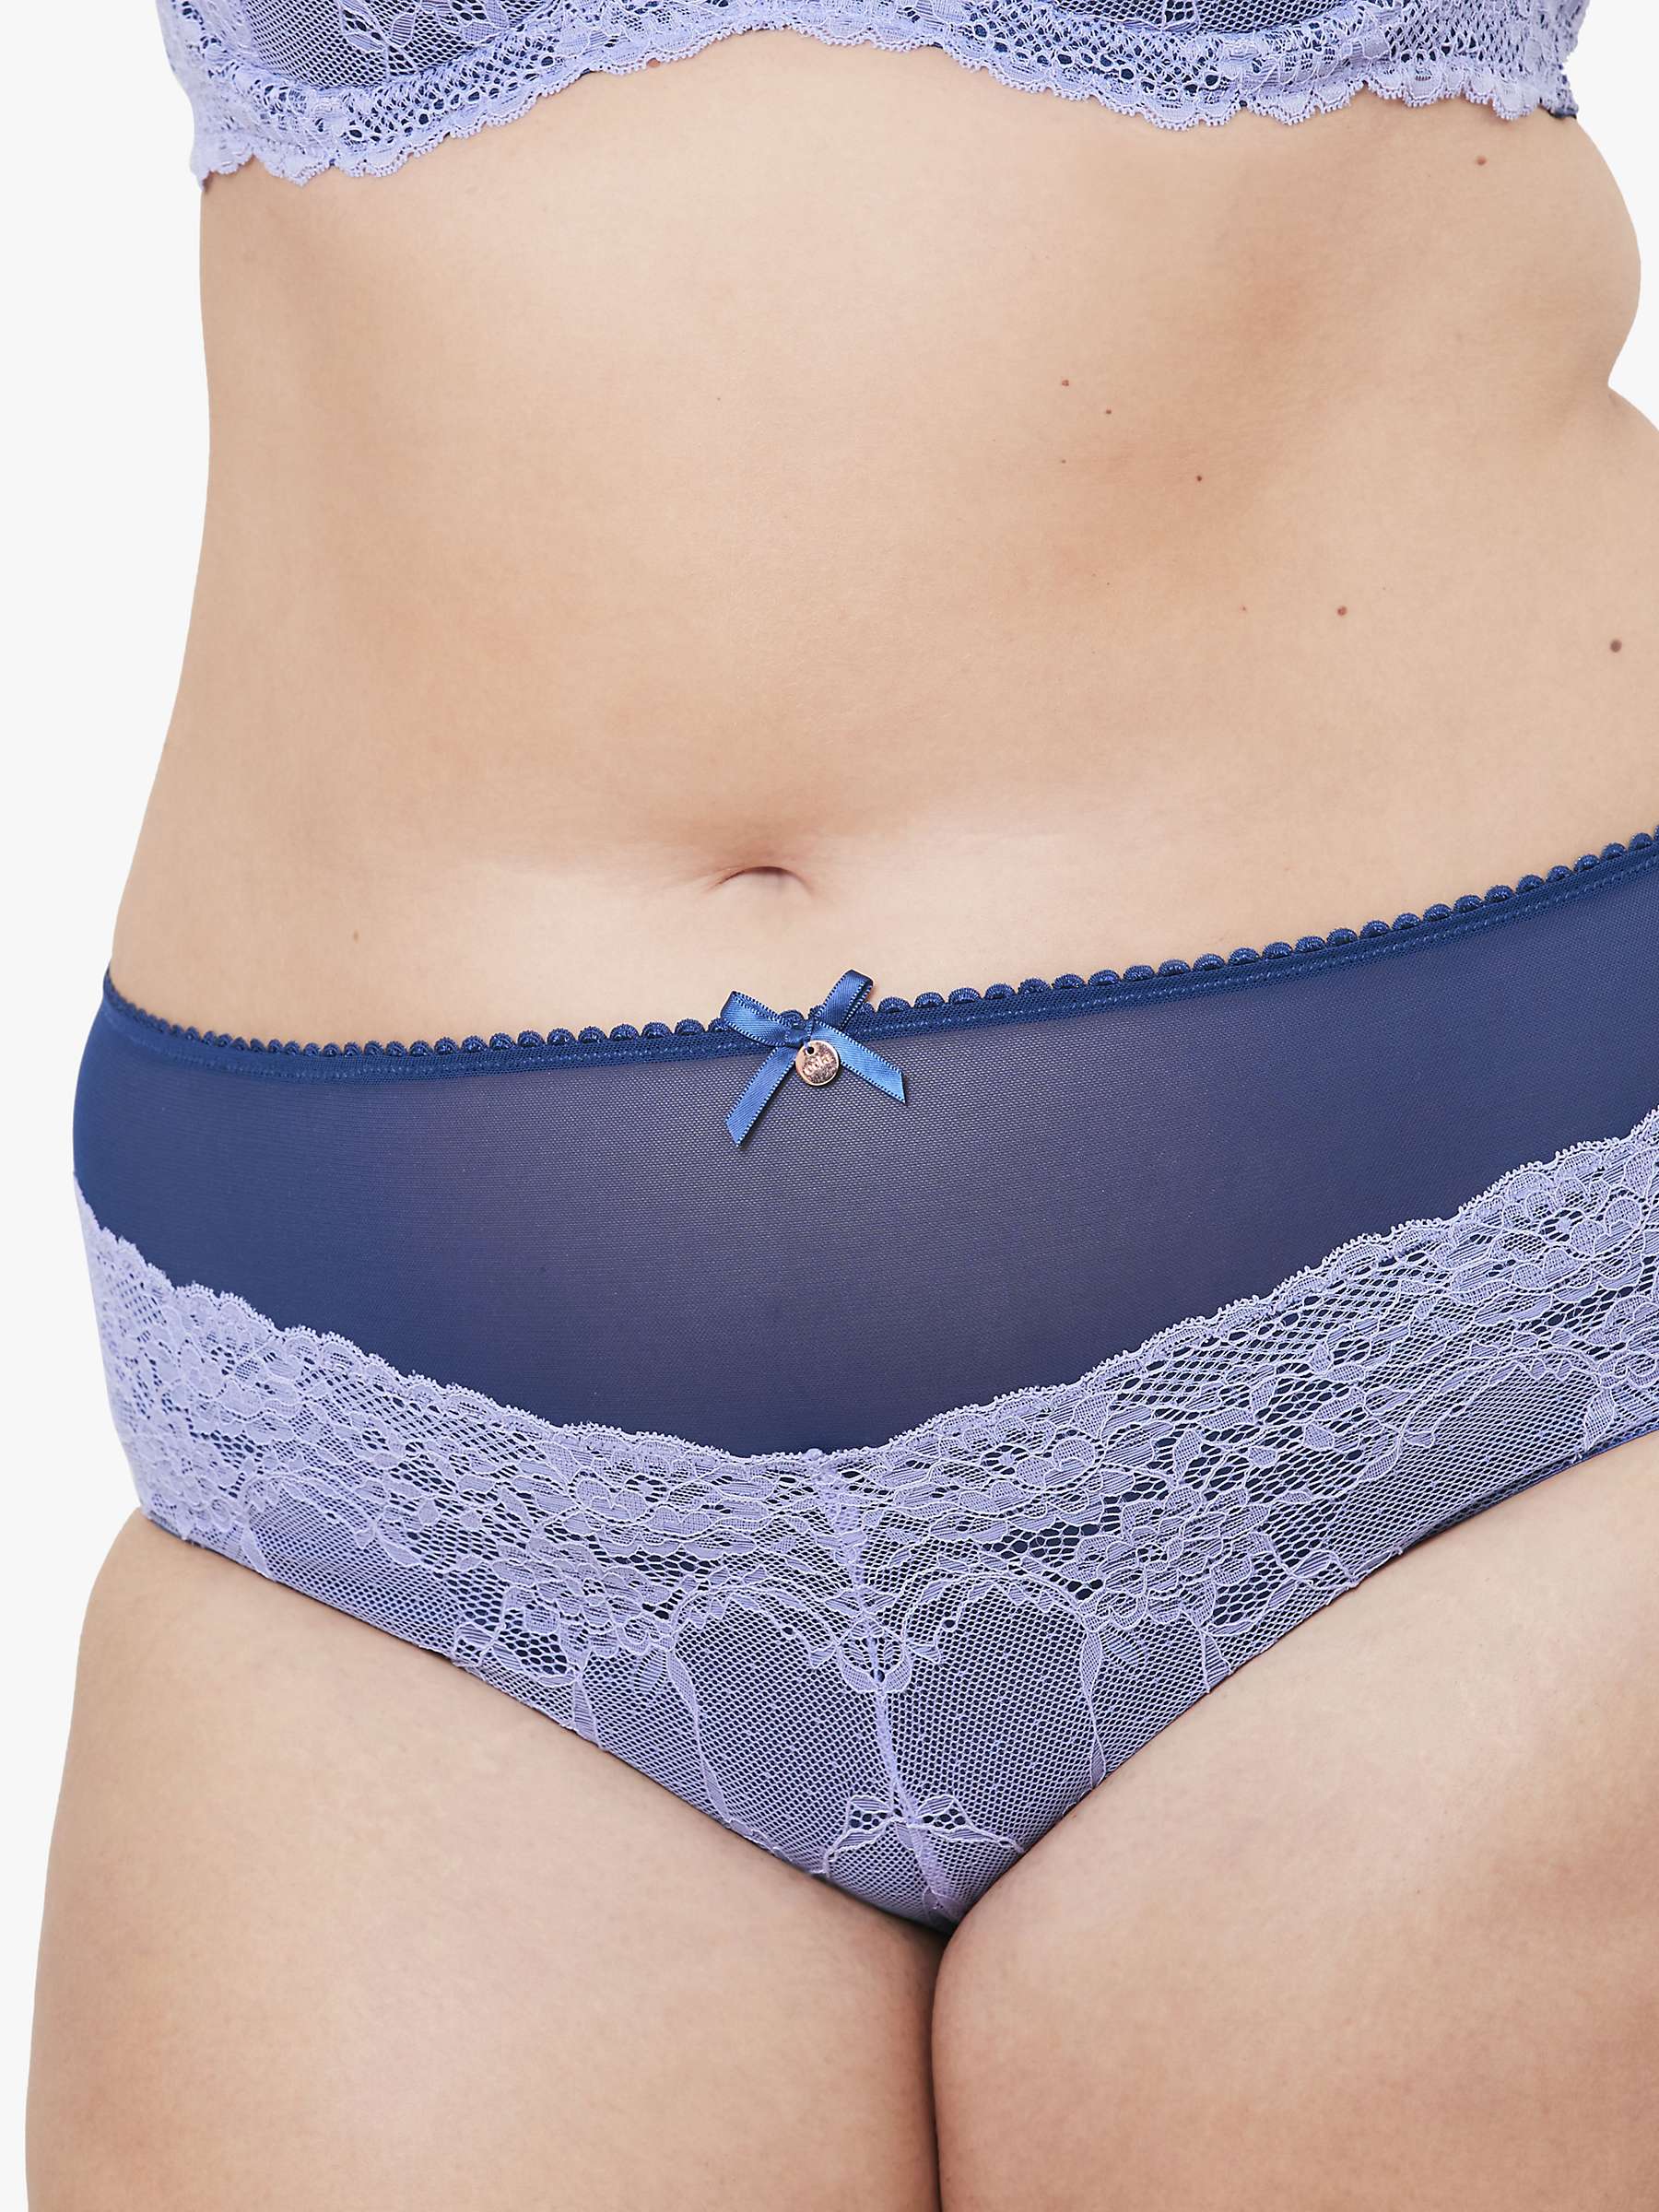 Buy Oola Lingerie Tonal Lace High Waist Knickers Online at johnlewis.com